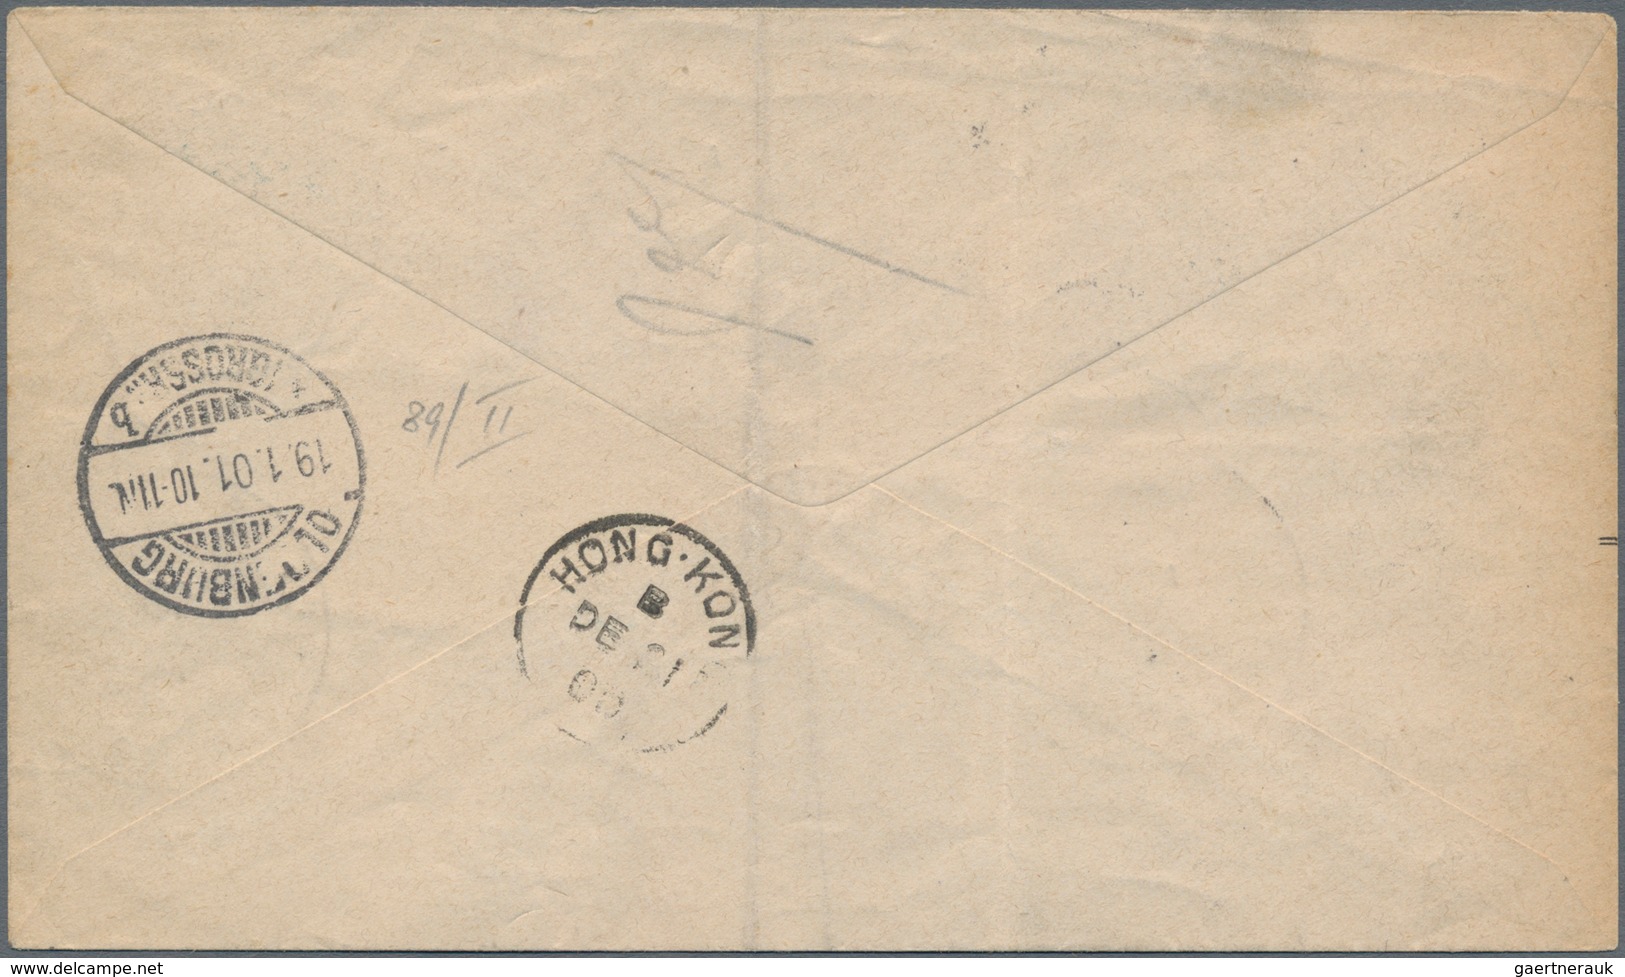 Russische Post In China: 1899/1910, Xanhai (Shanghai) Russian P.o. Usages: 1, 2, 3, 5, 7 10 K. (one - China